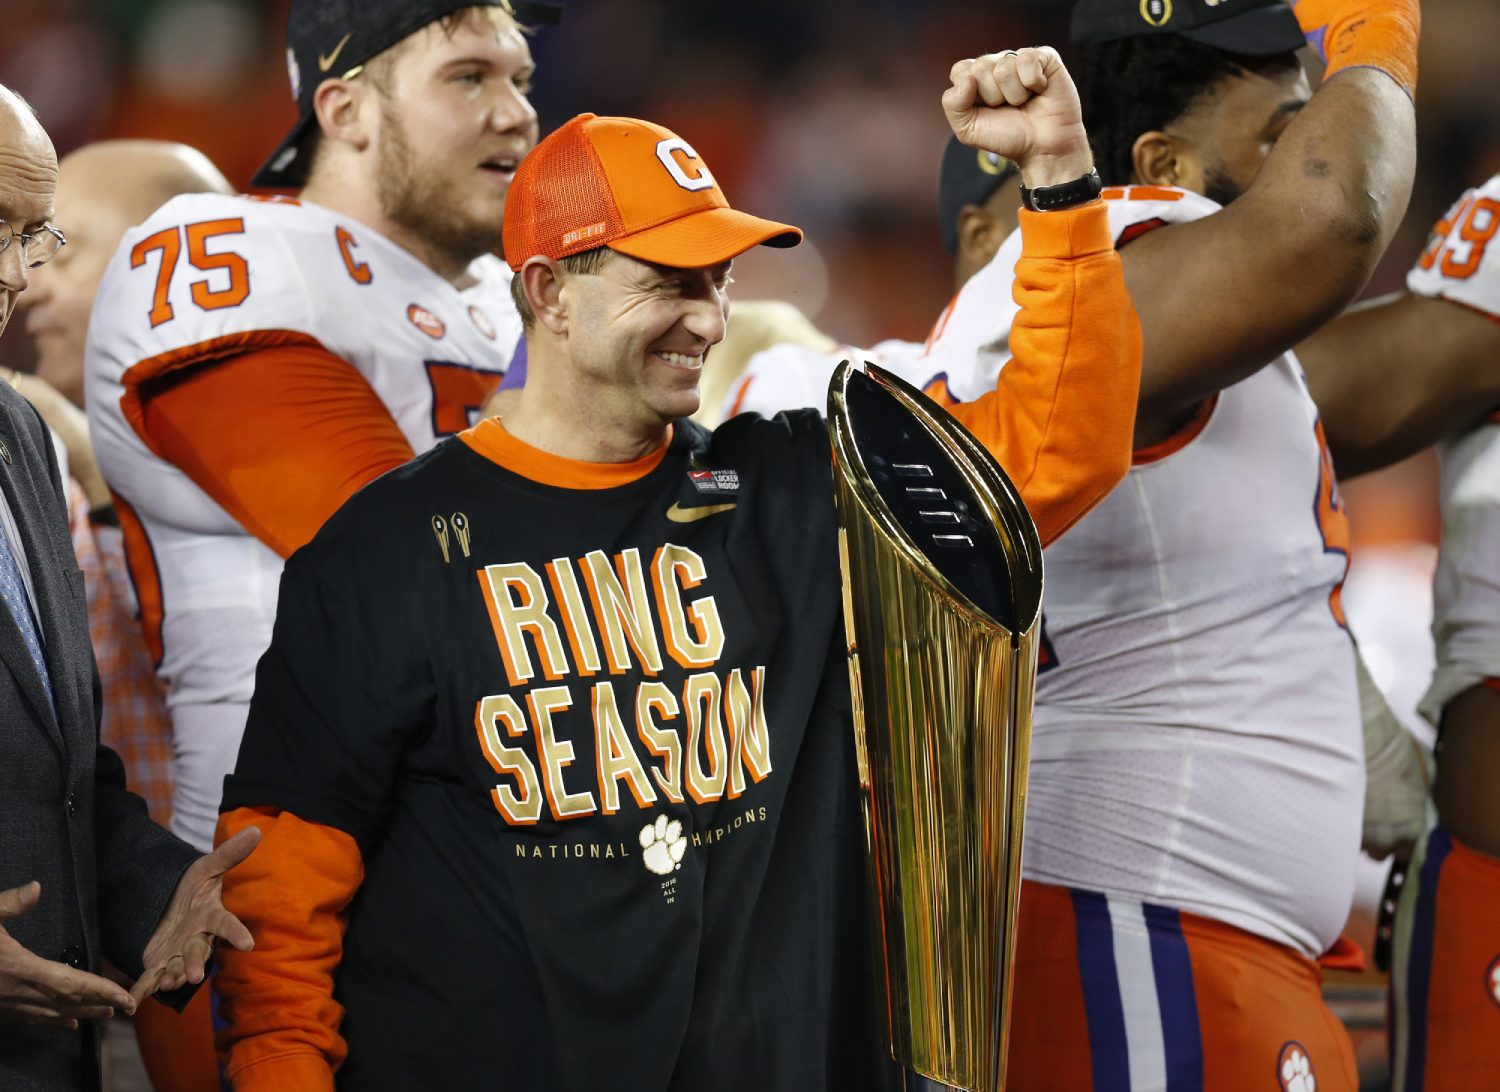 Dabo Swinney has become one of the top college football coaches in the country for the Clemson Tigers. What is his net worth?